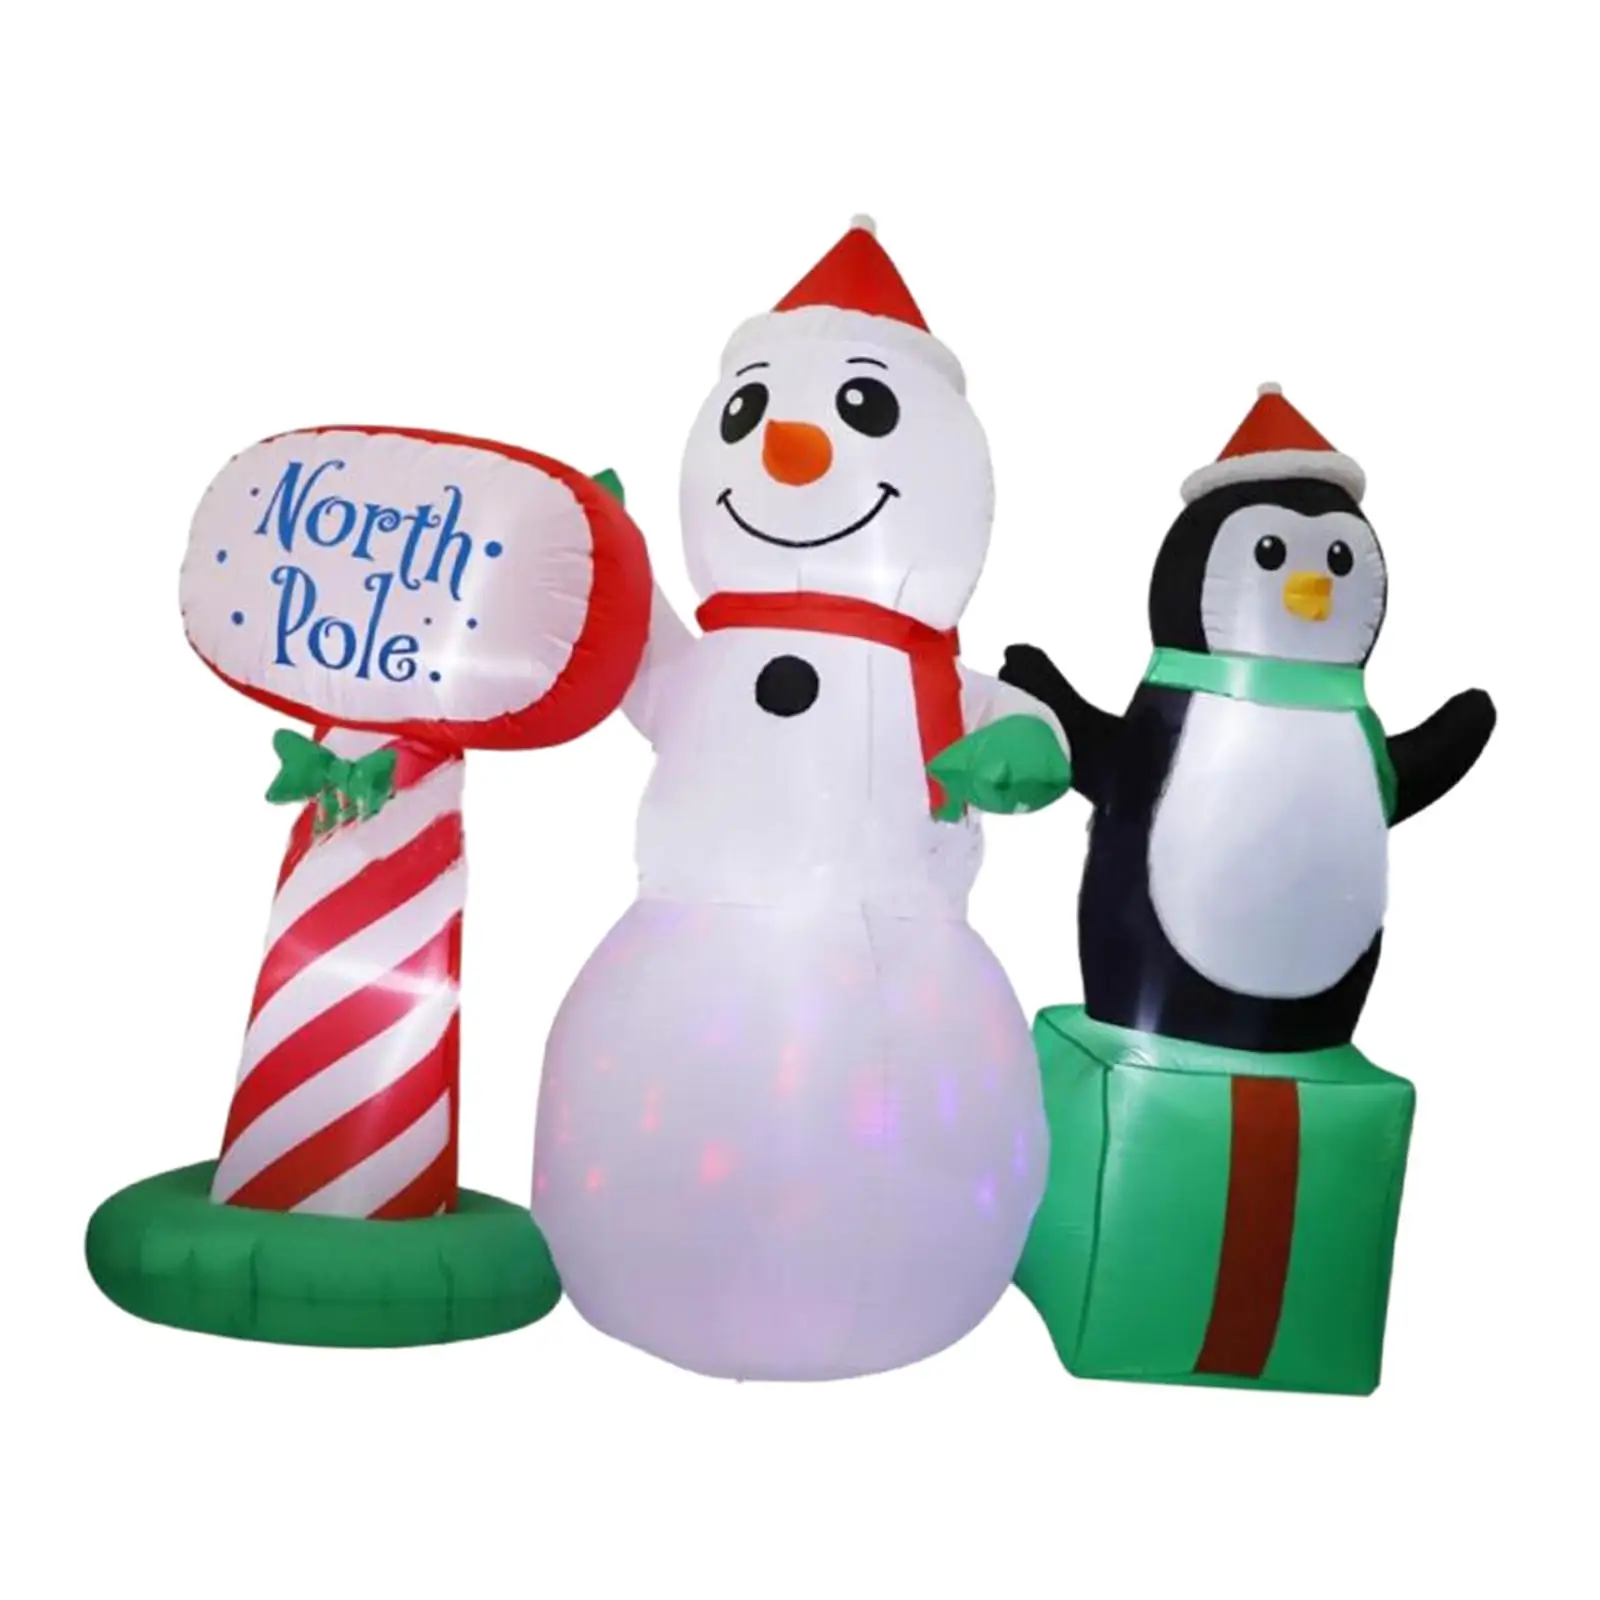 Christmas Inflatable Snowman Props Funny with LED Lights Large Blow up Snow Man for Patio Vacation Party Outdoor Holiday